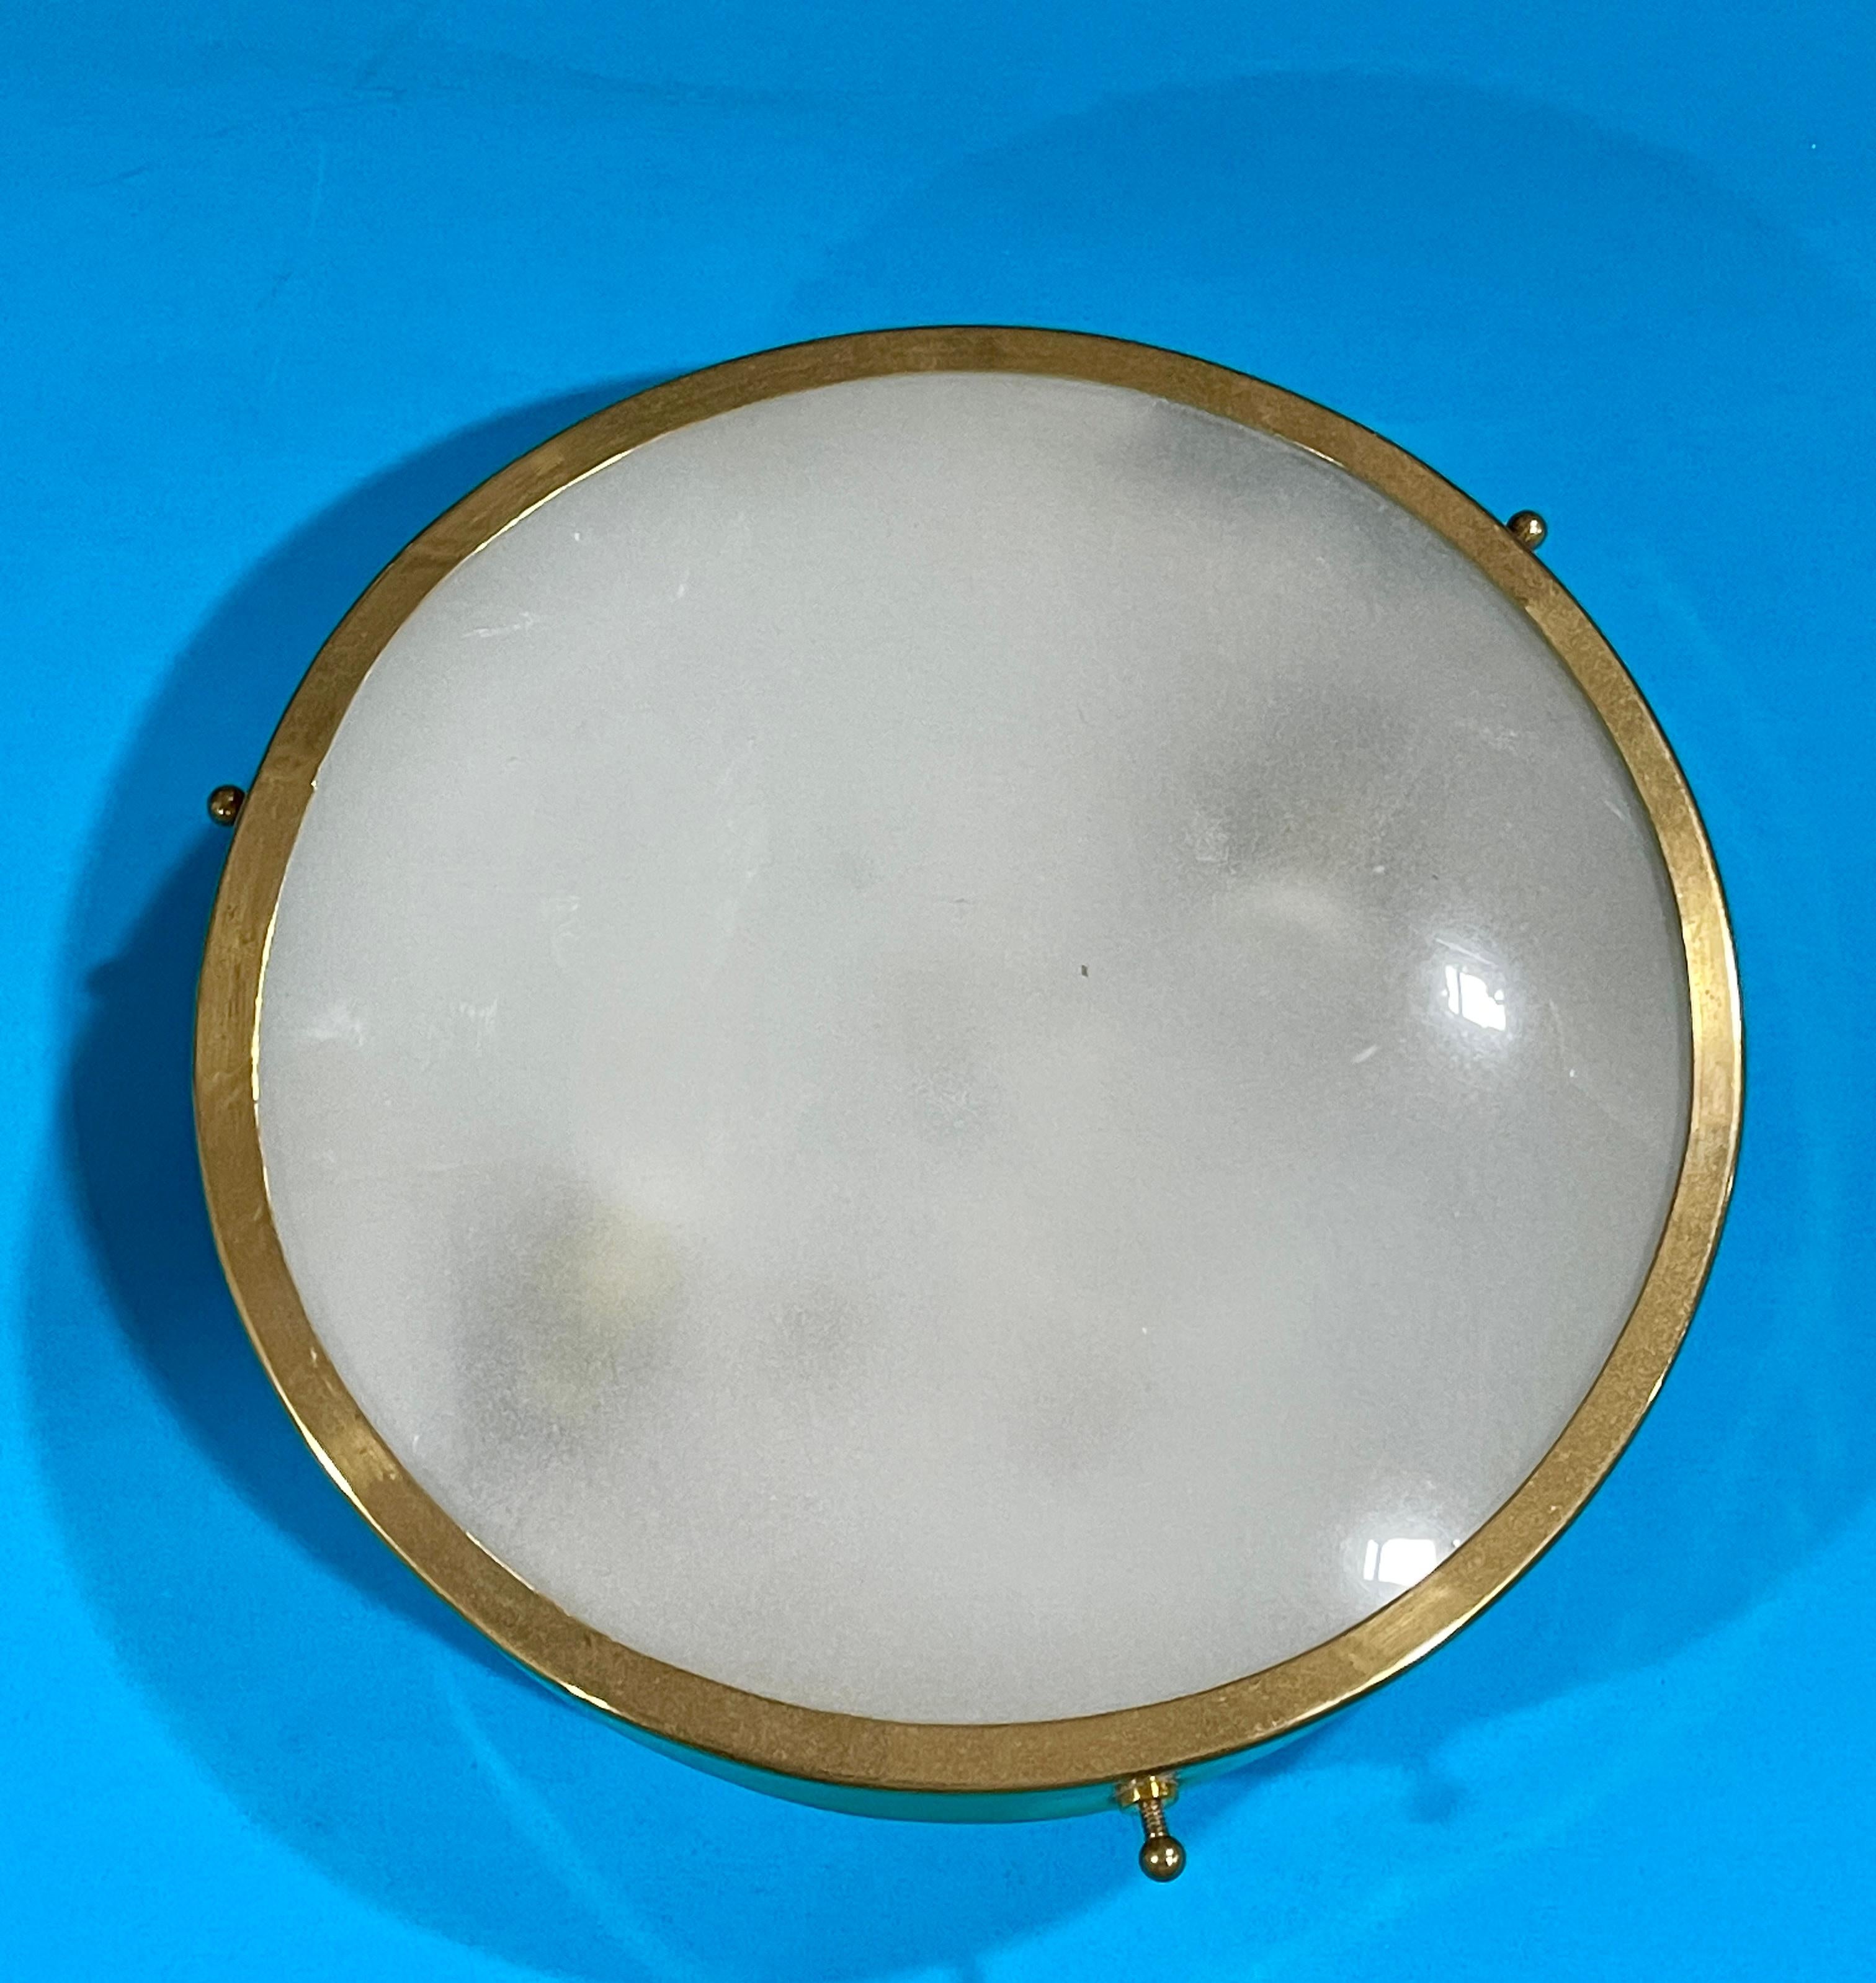 Greco Illuminazion round brass ringed mini flush mount or wall light with convex glass sandblasted on the inside. 8” diameter 2” high fitted with two candelabra sockets up to 60 watts each.
